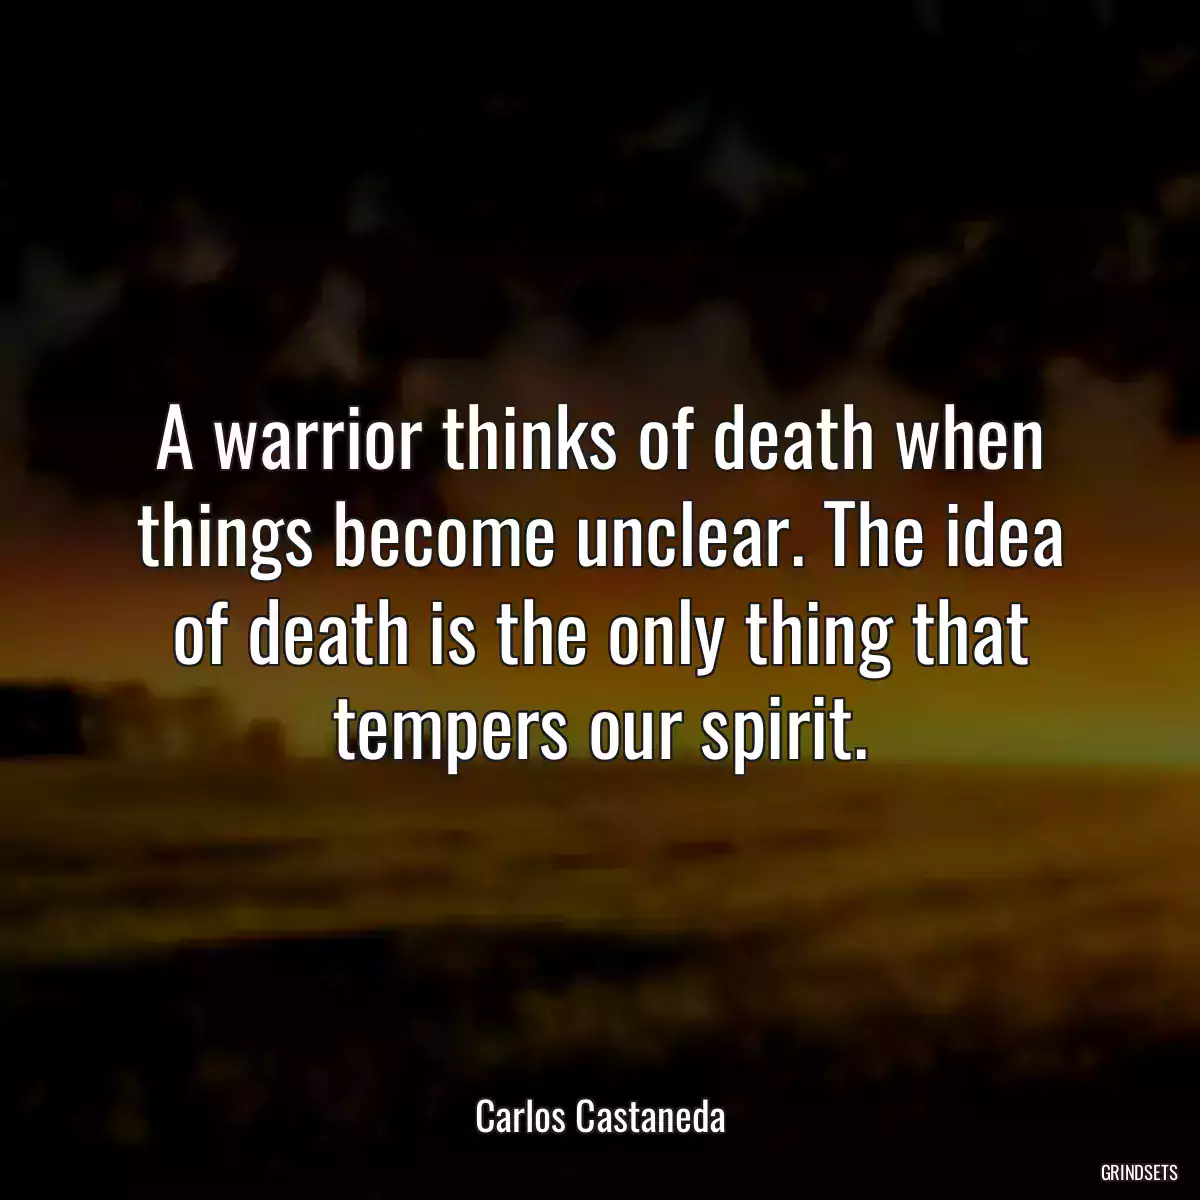 A warrior thinks of death when things become unclear. The idea of death is the only thing that tempers our spirit.